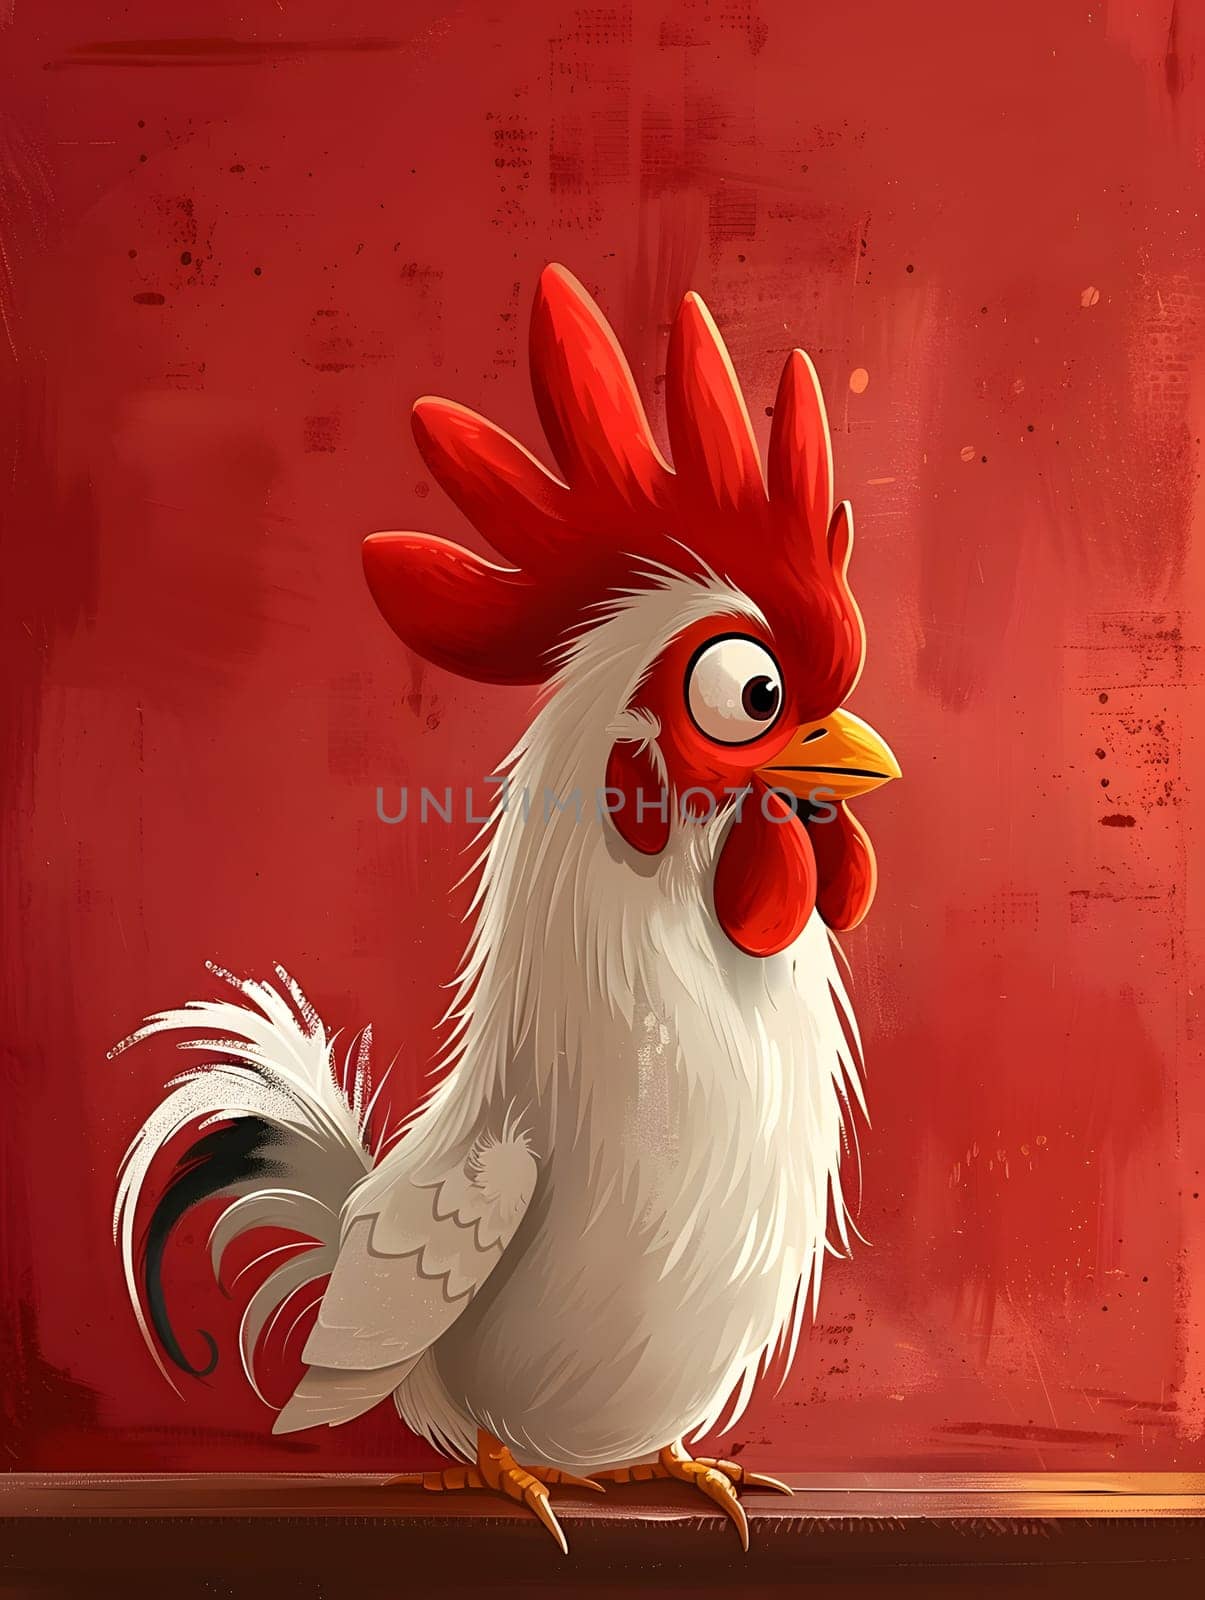 A Galliformes bird, known as a rooster, with a red comb and feather standing on a wall. This chicken, a member of the Phasianidae family, is a common poultry livestock